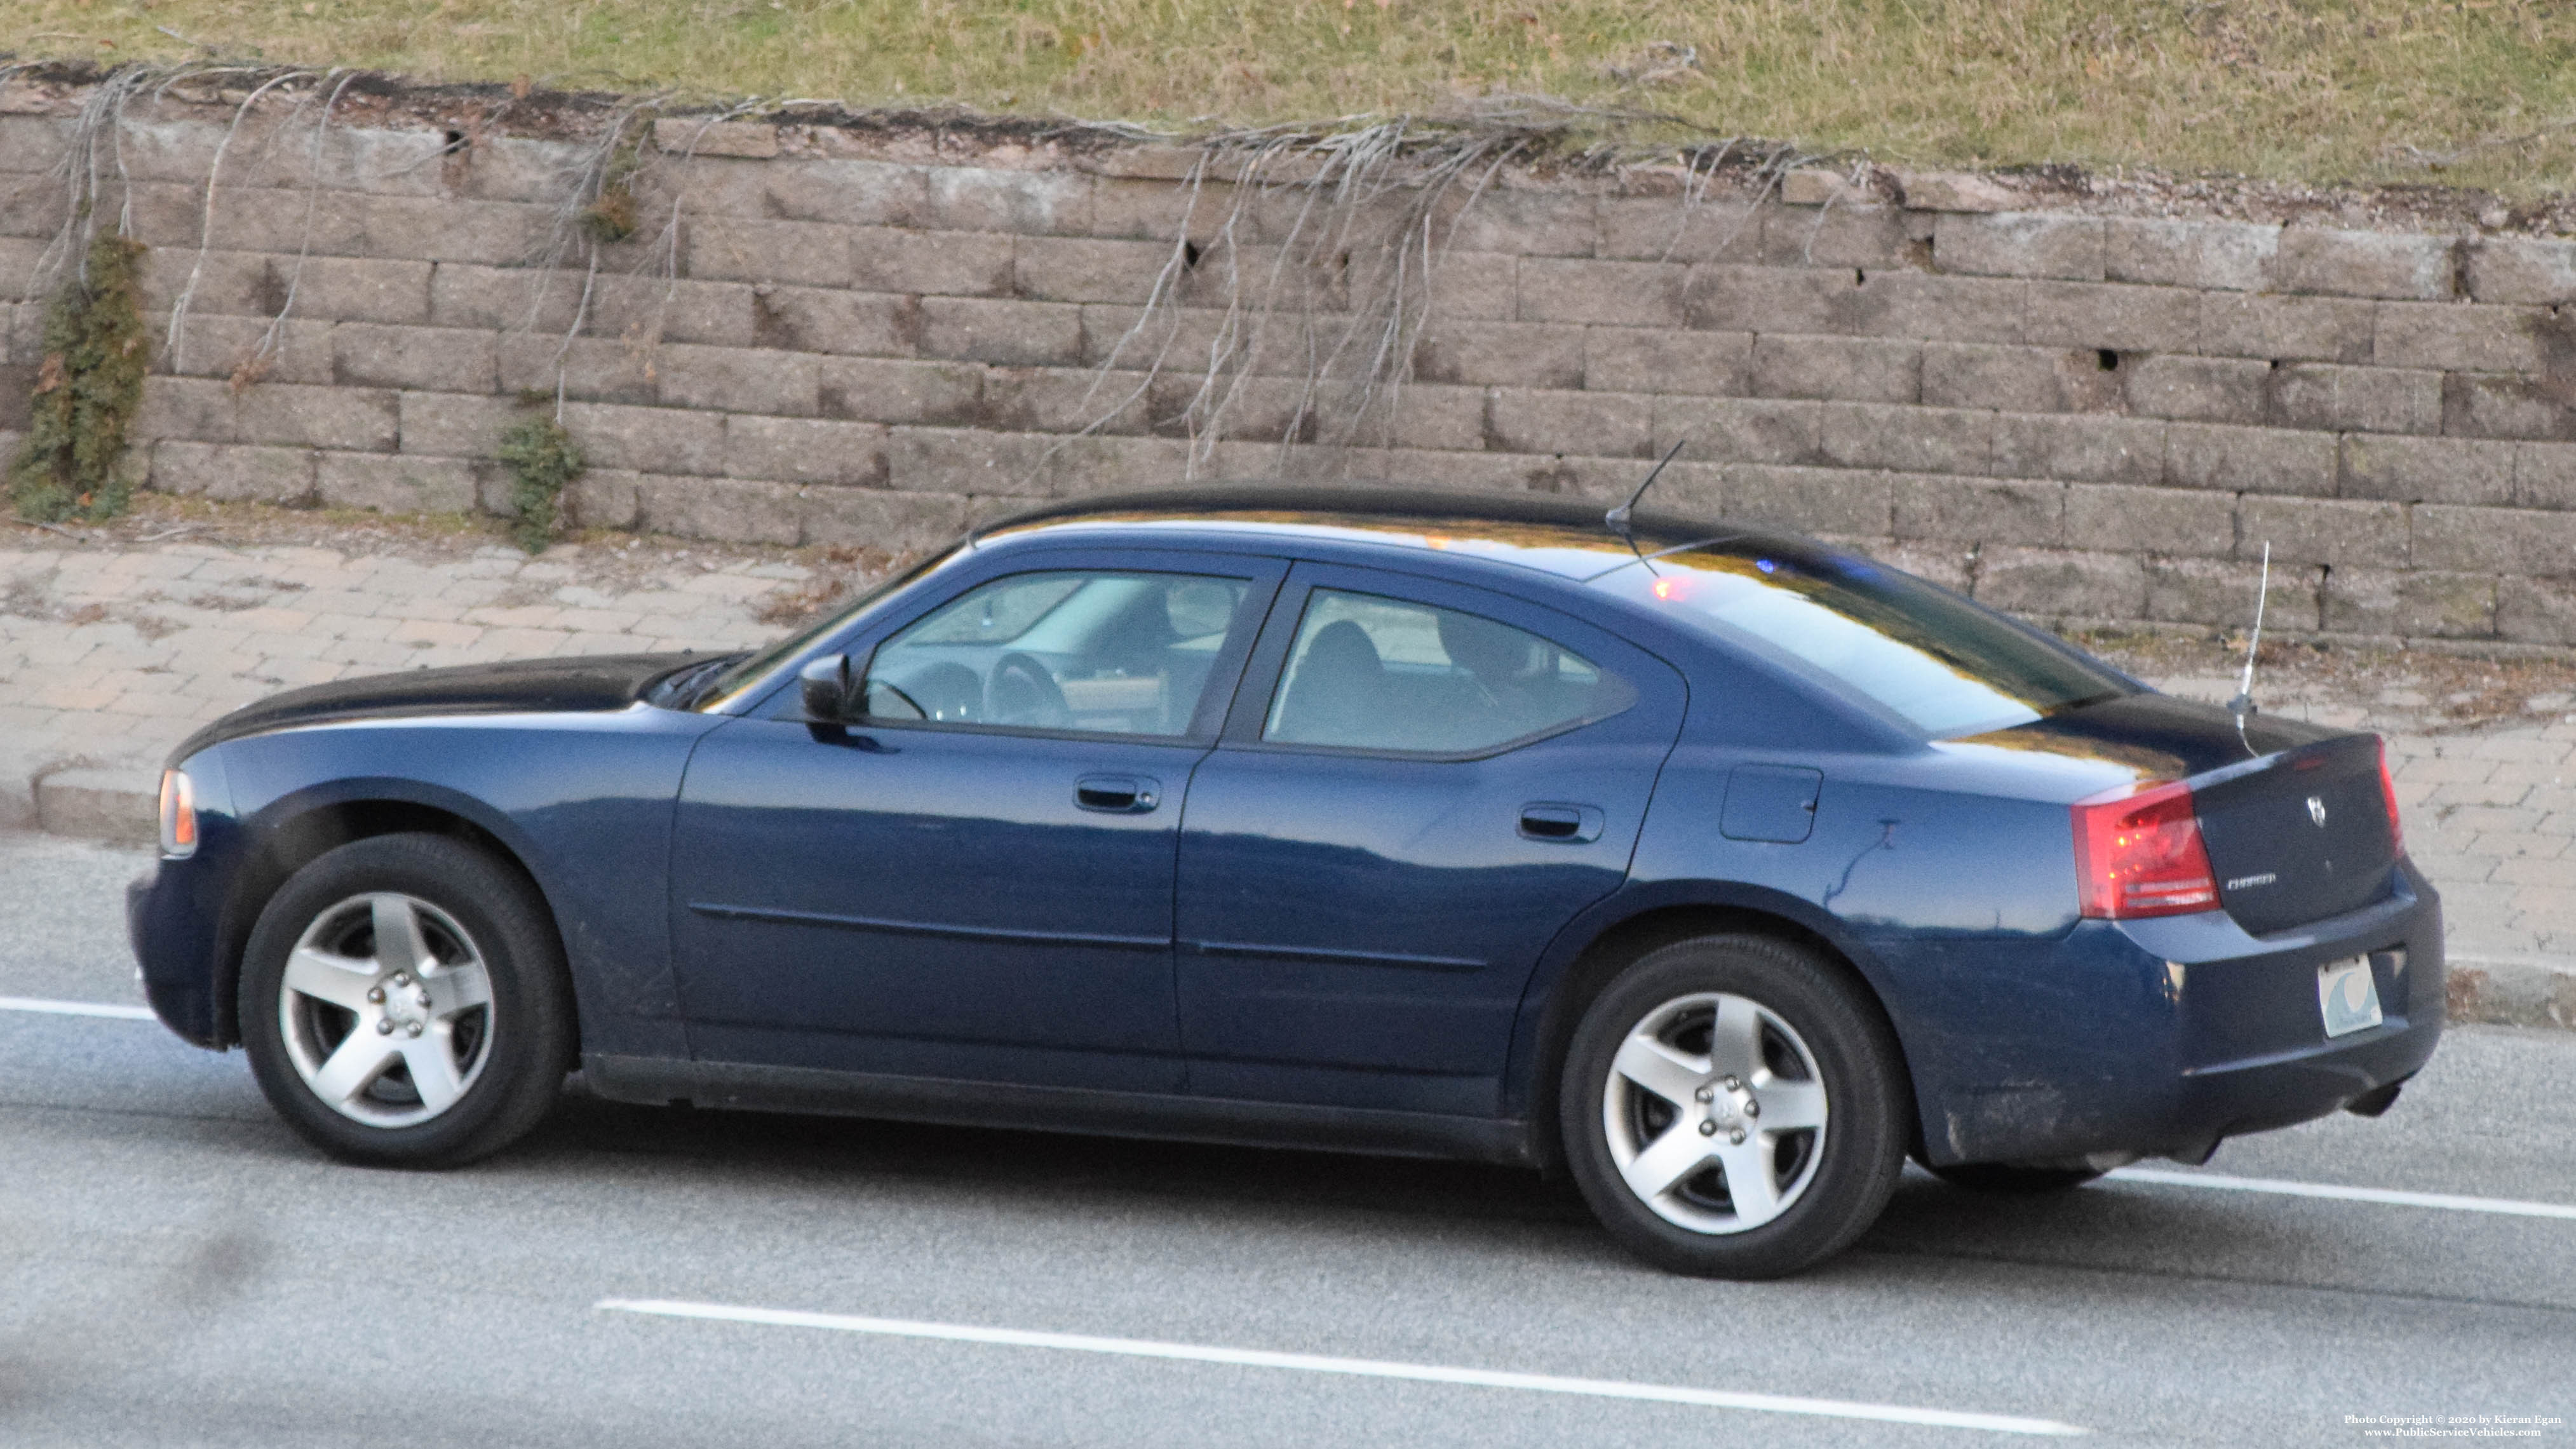 A photo  of Rhode Island State Police
            Unmarked Unit, a 2006-2010 Dodge Charger             taken by Kieran Egan